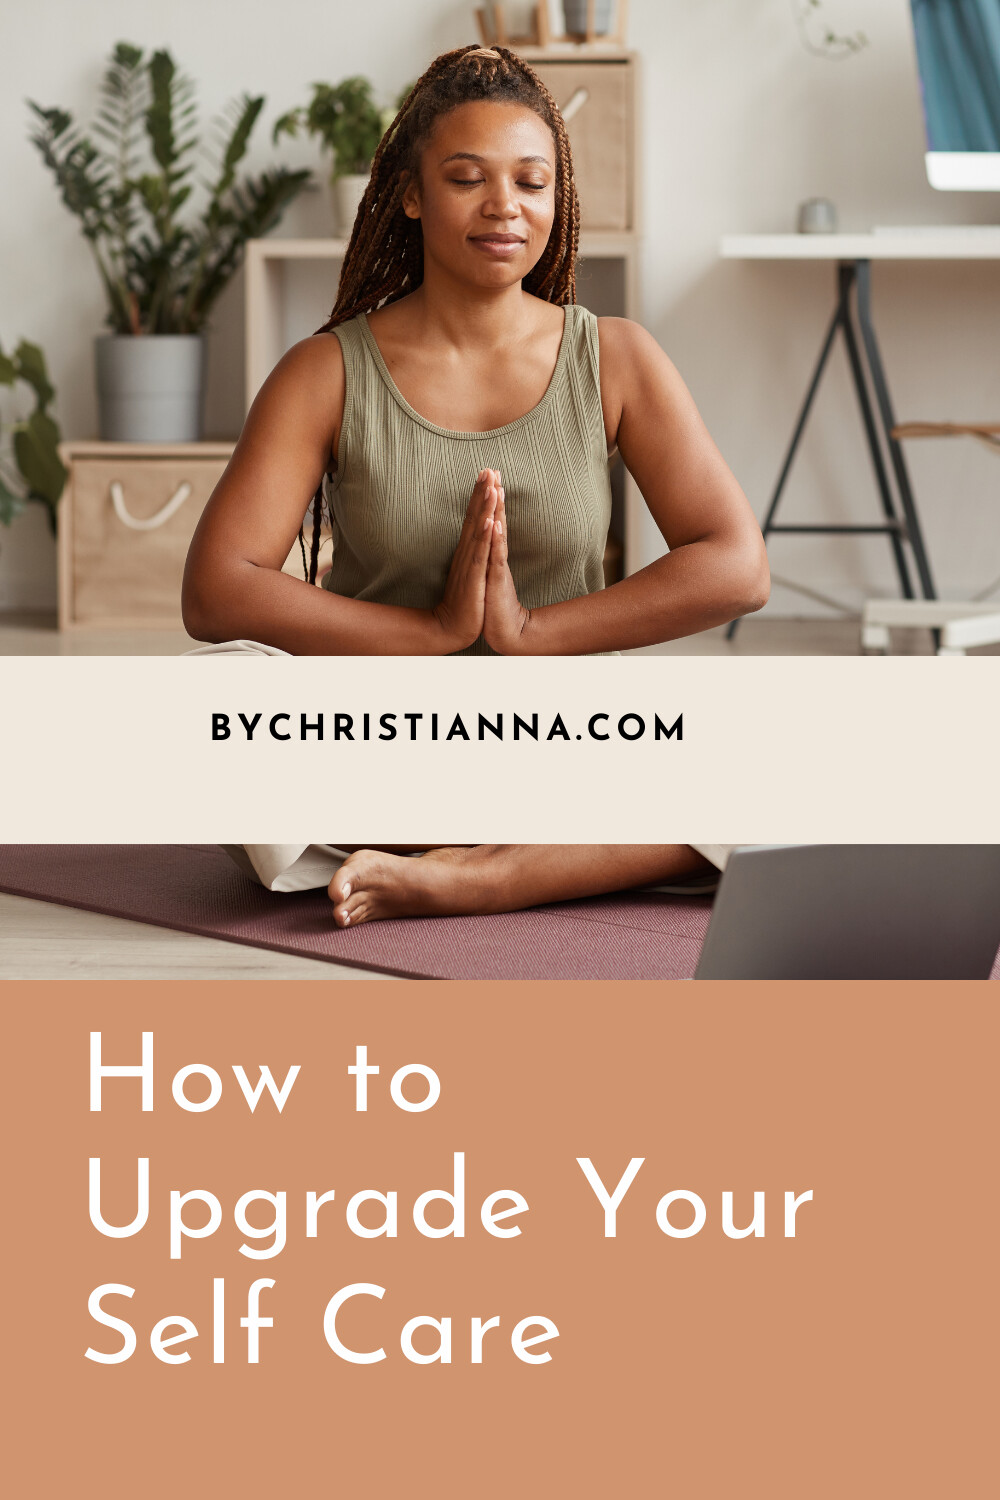 One Simple Way to Upgrade Your Self Care